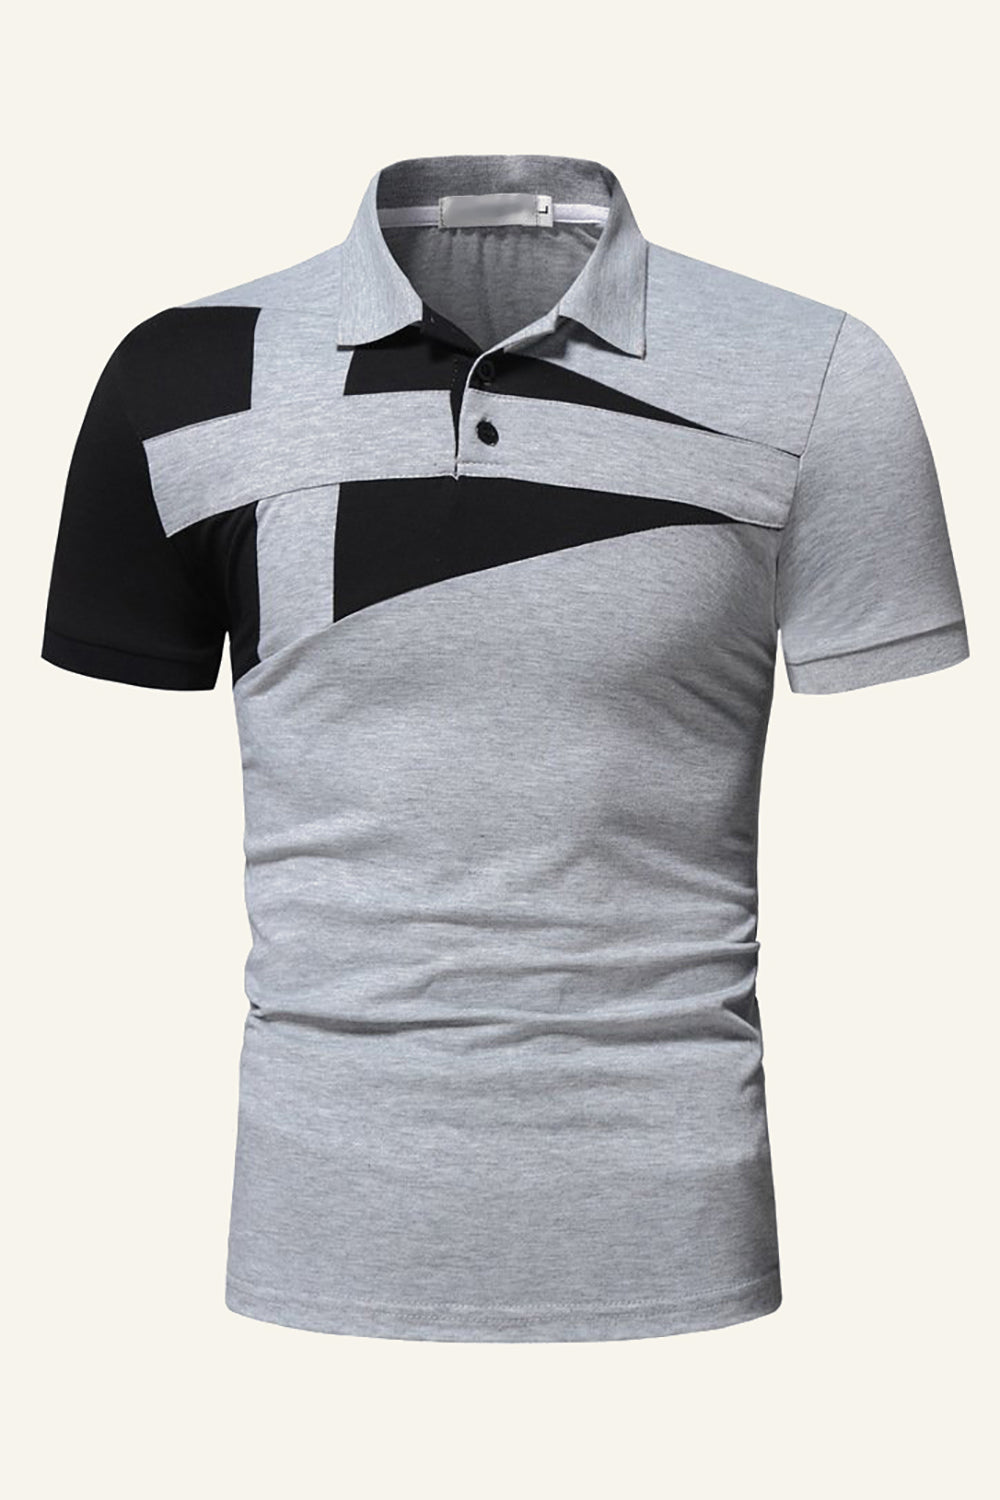 Black and Grey Regular Fit Collared Patchwork Men's Polo Shirt